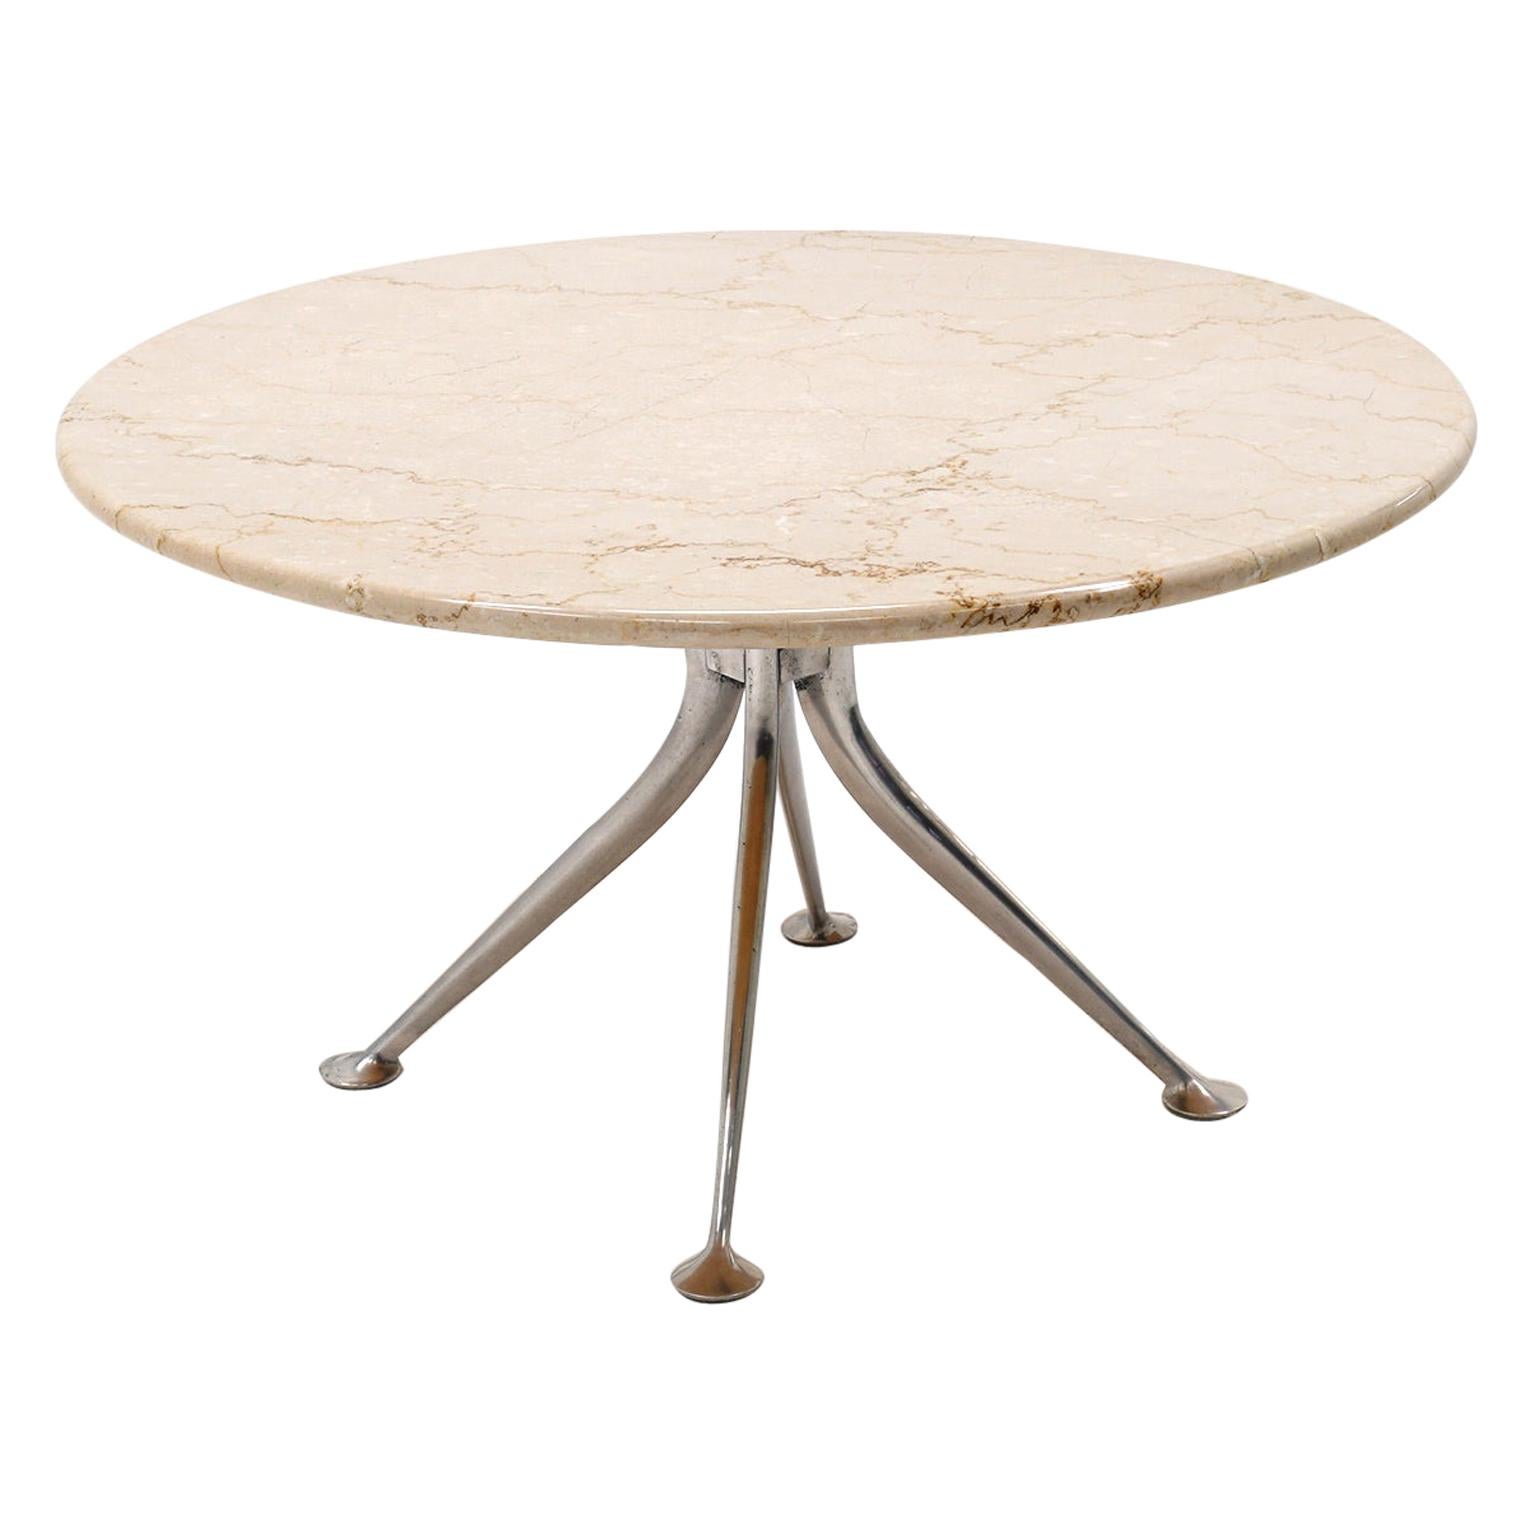 Early Alexander Girard Round Coffee / Side Table, Beige Marble, Aluminum Base